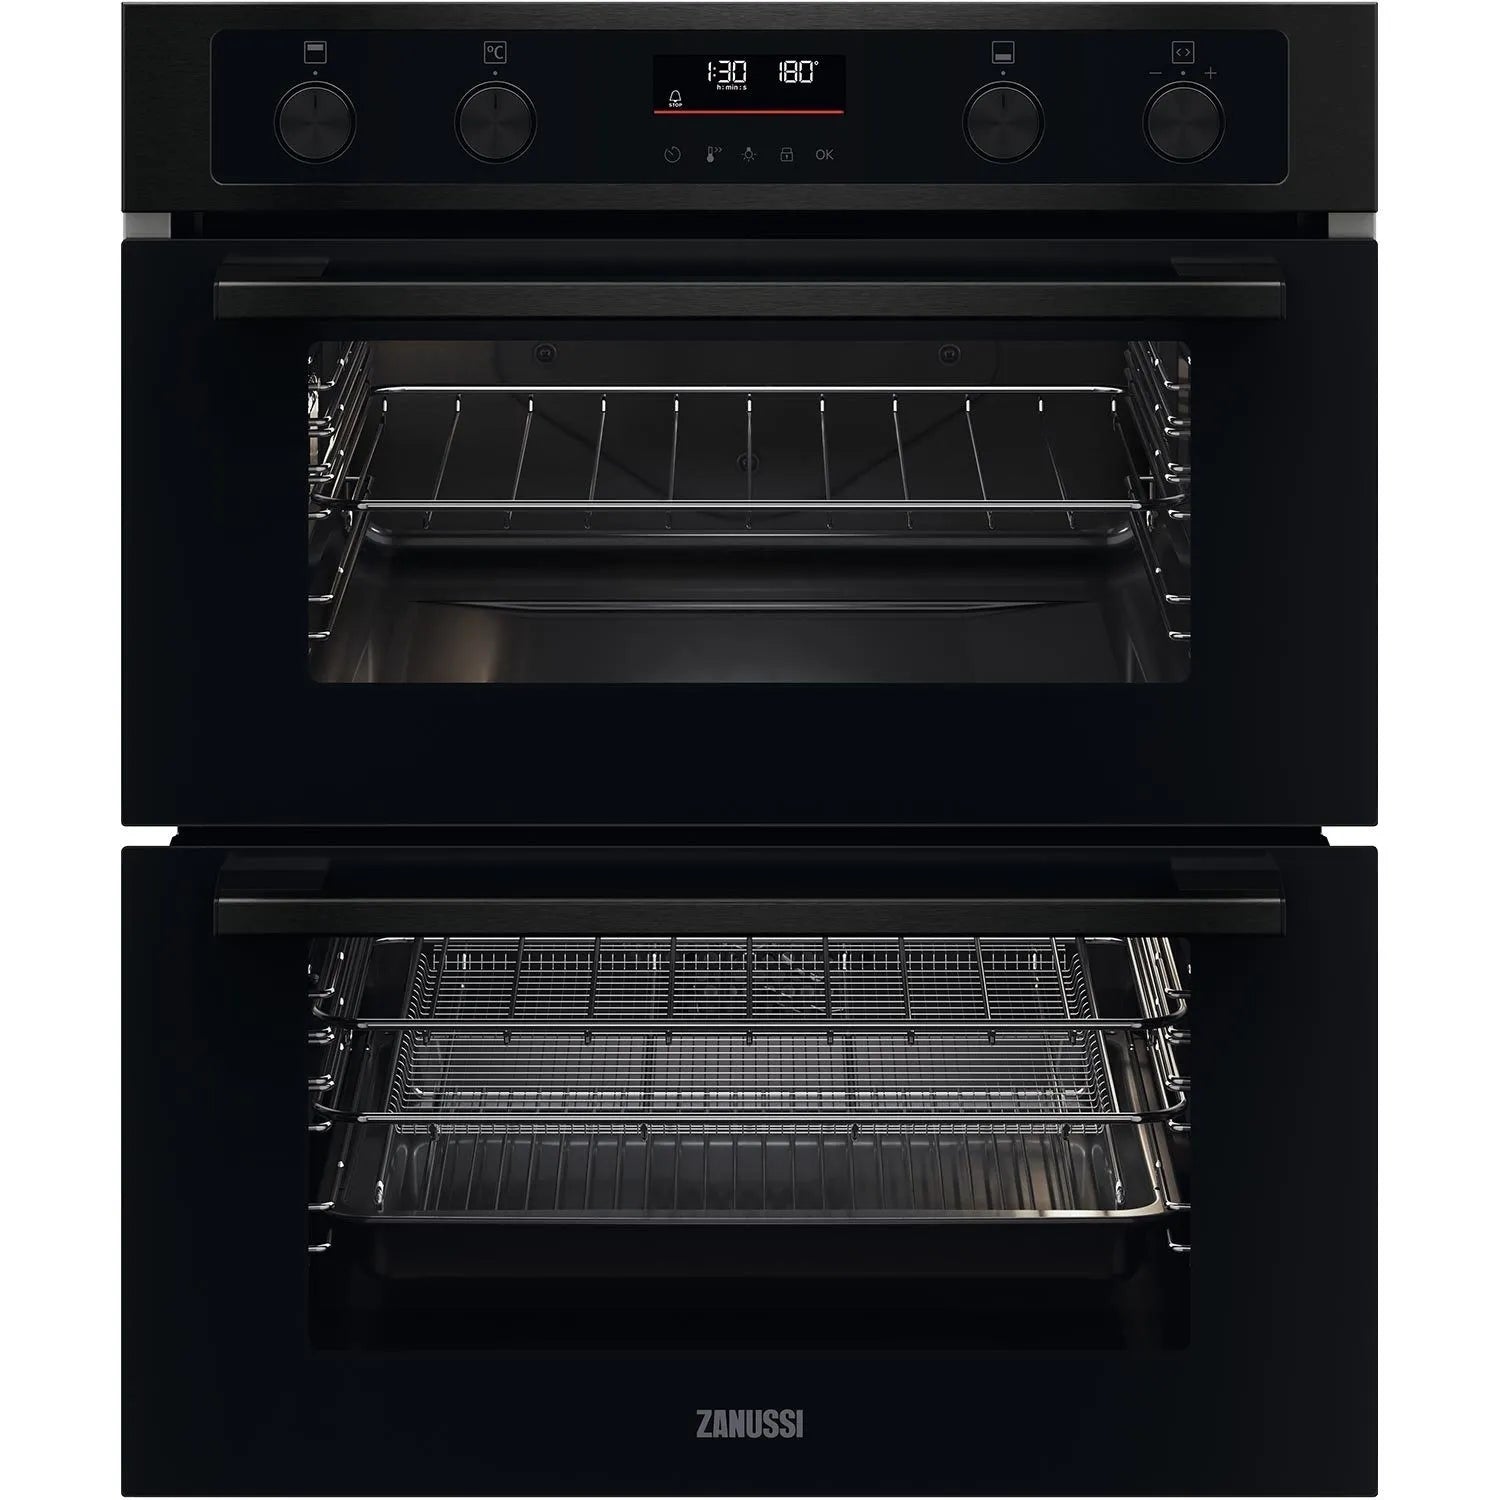 Zanussi ZPCNA7KN Double Oven Built Under in Stainless Steel GRADE A